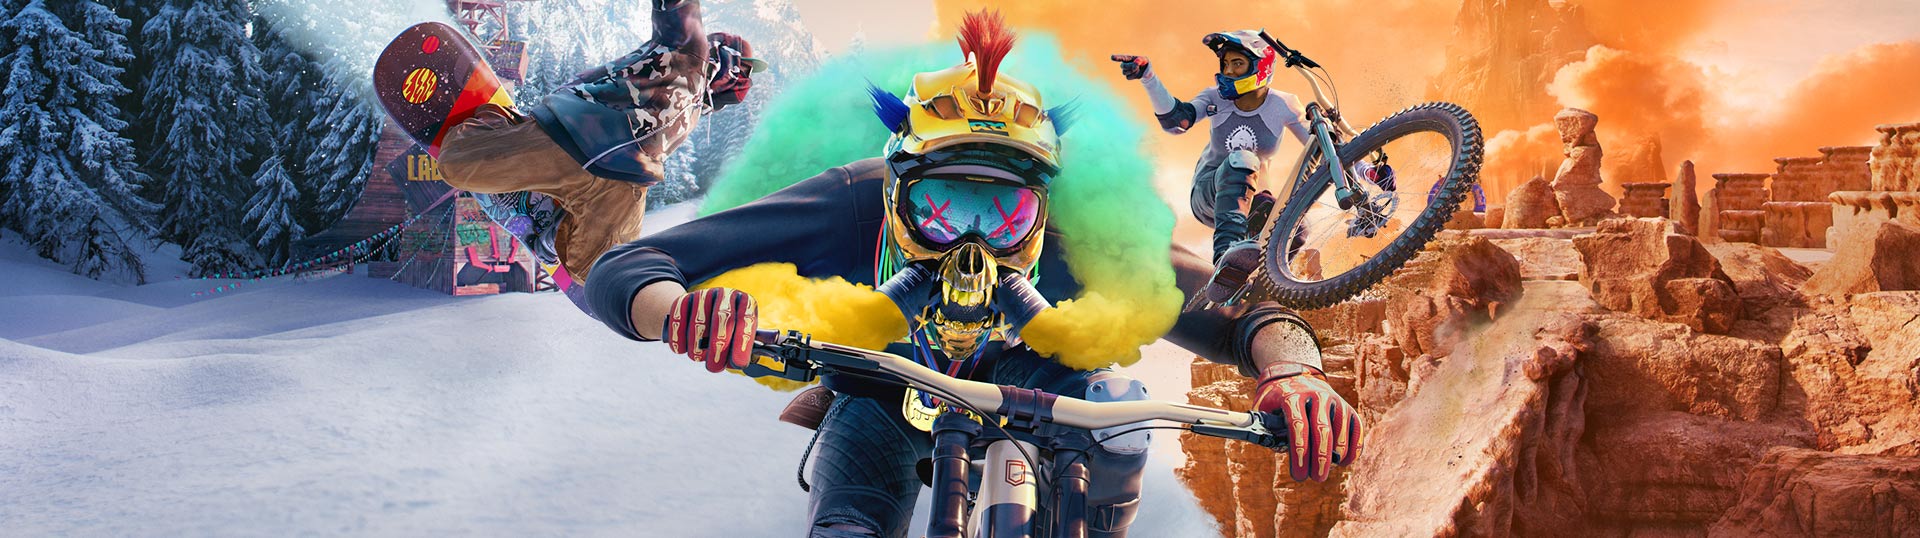 Buy Riders Republic PC, PS4, PS5, Xbox Editions | Ubisoft Store